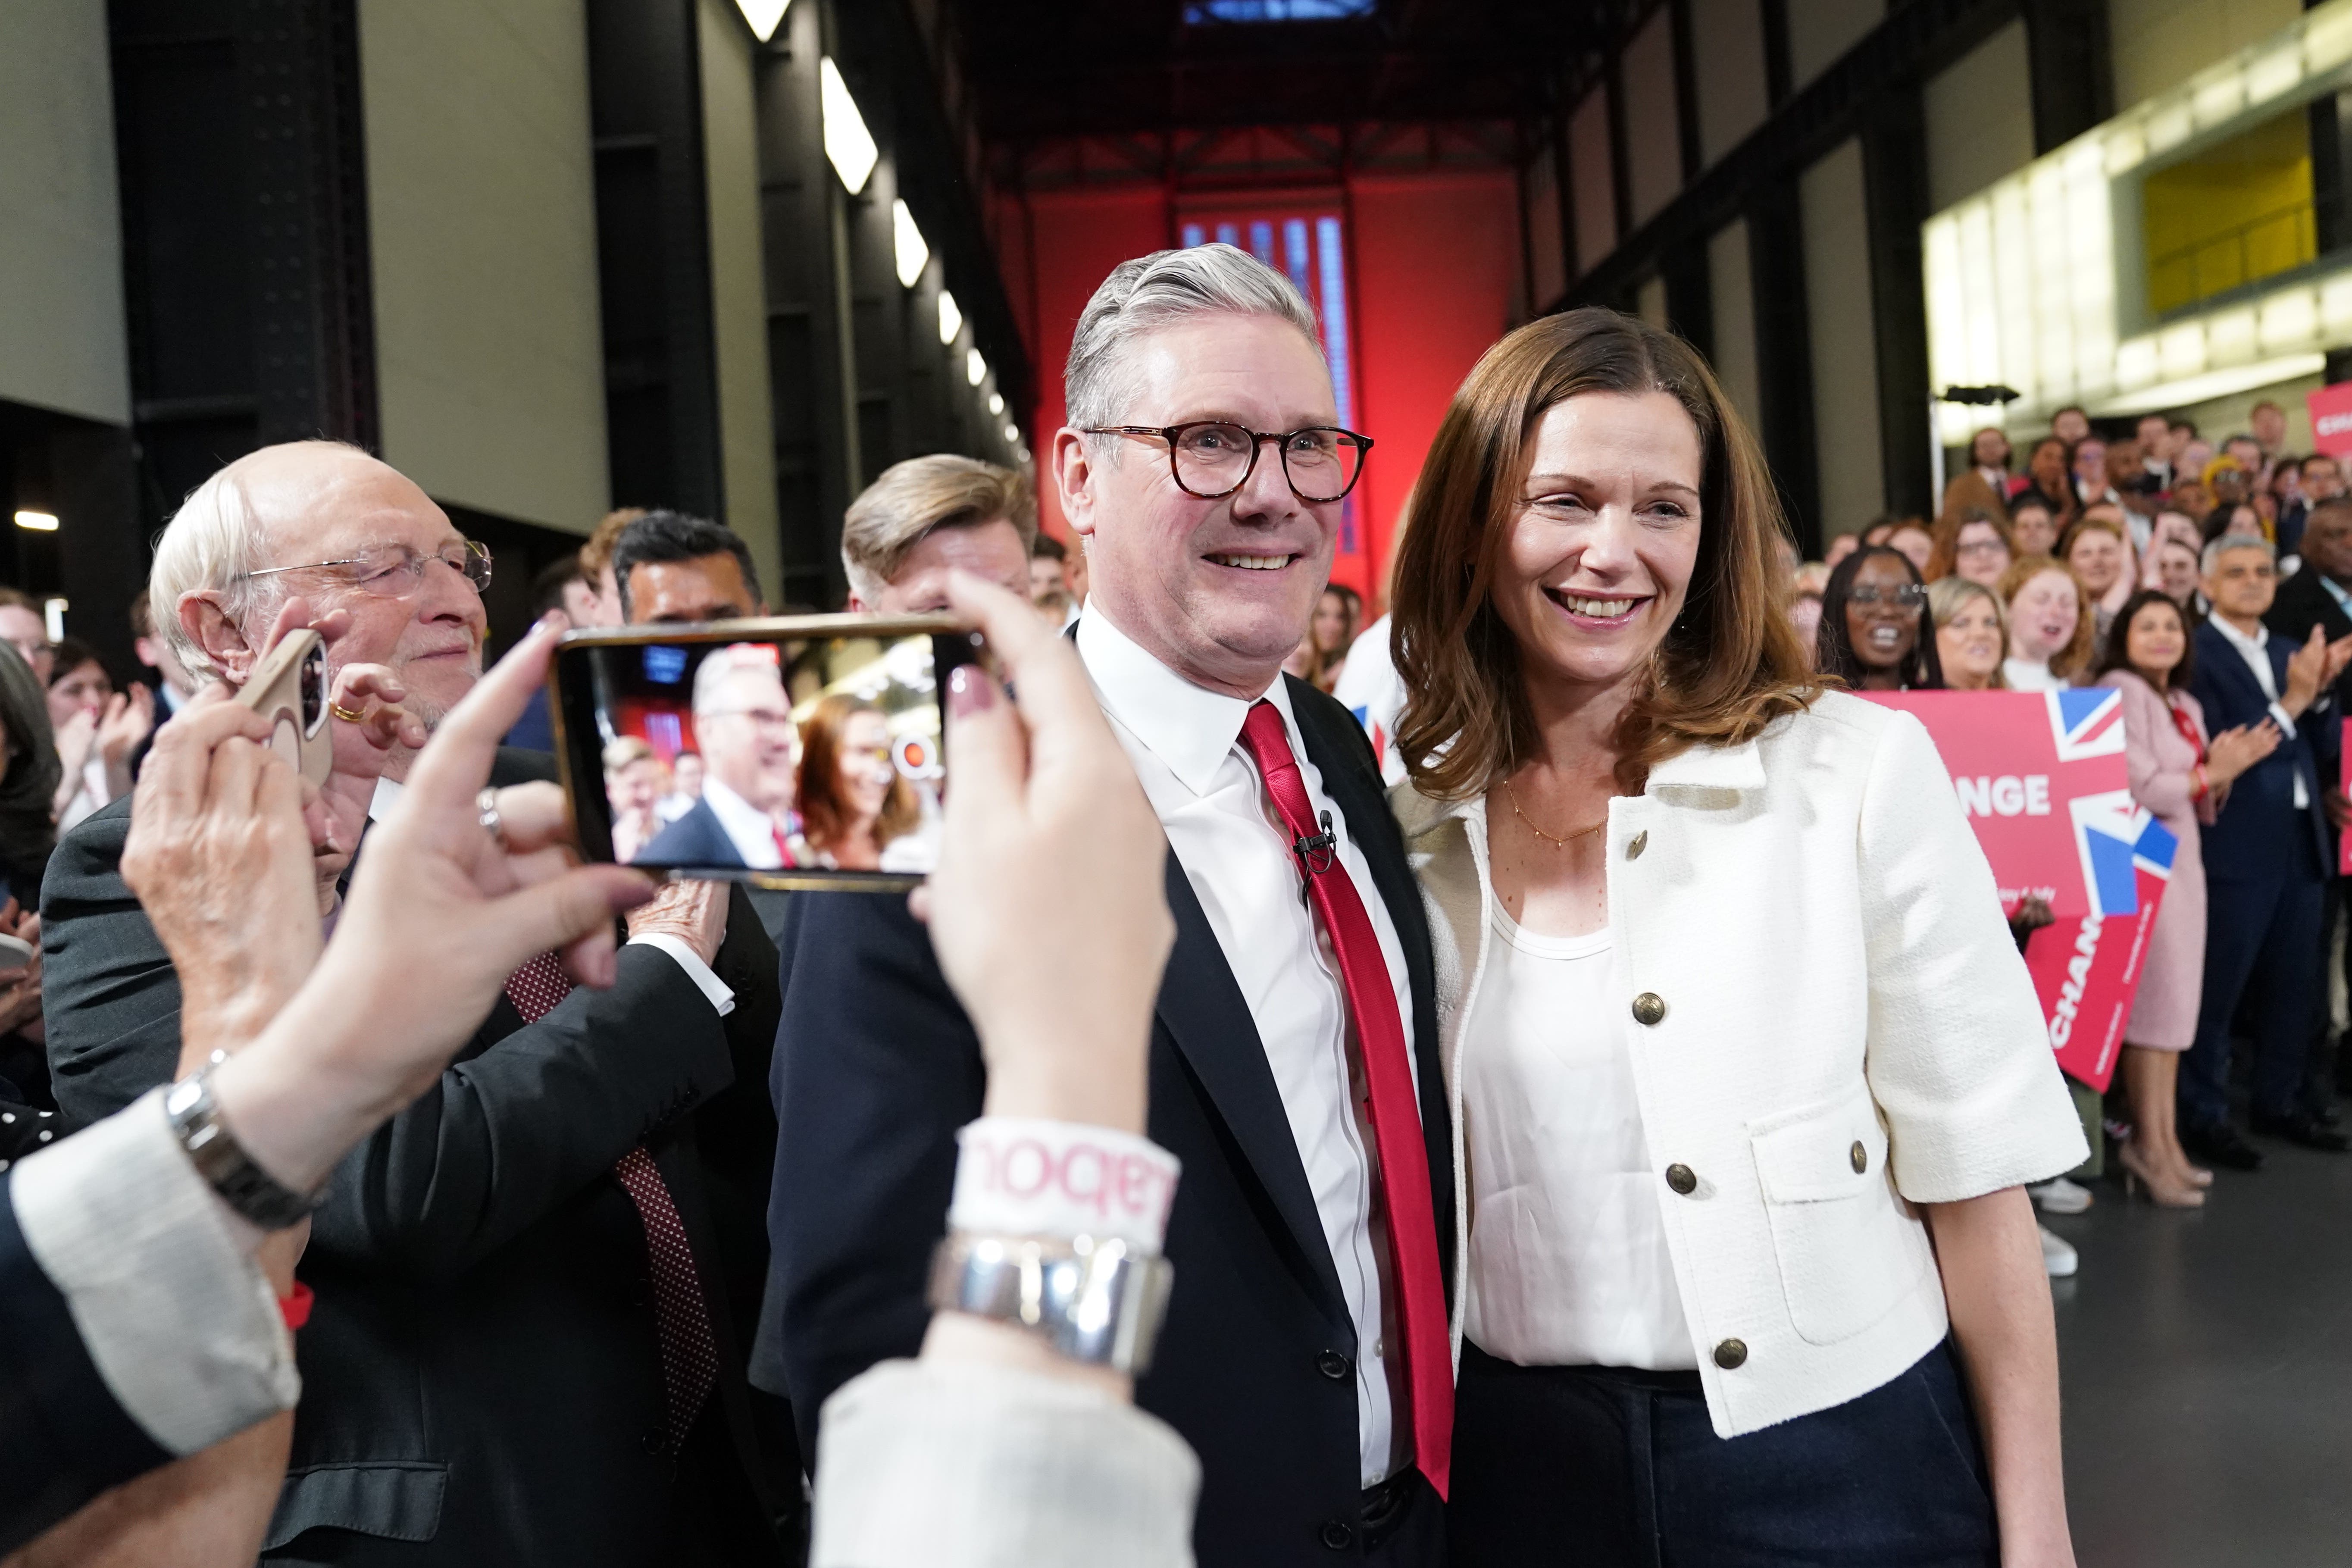 Sir Keir Starmer will be the UK’s new Labour prime minister after a Conservative rout saw former premier Liz Truss and 11 serving Cabinet members lose their seats (Stefan Rousseau/PA)